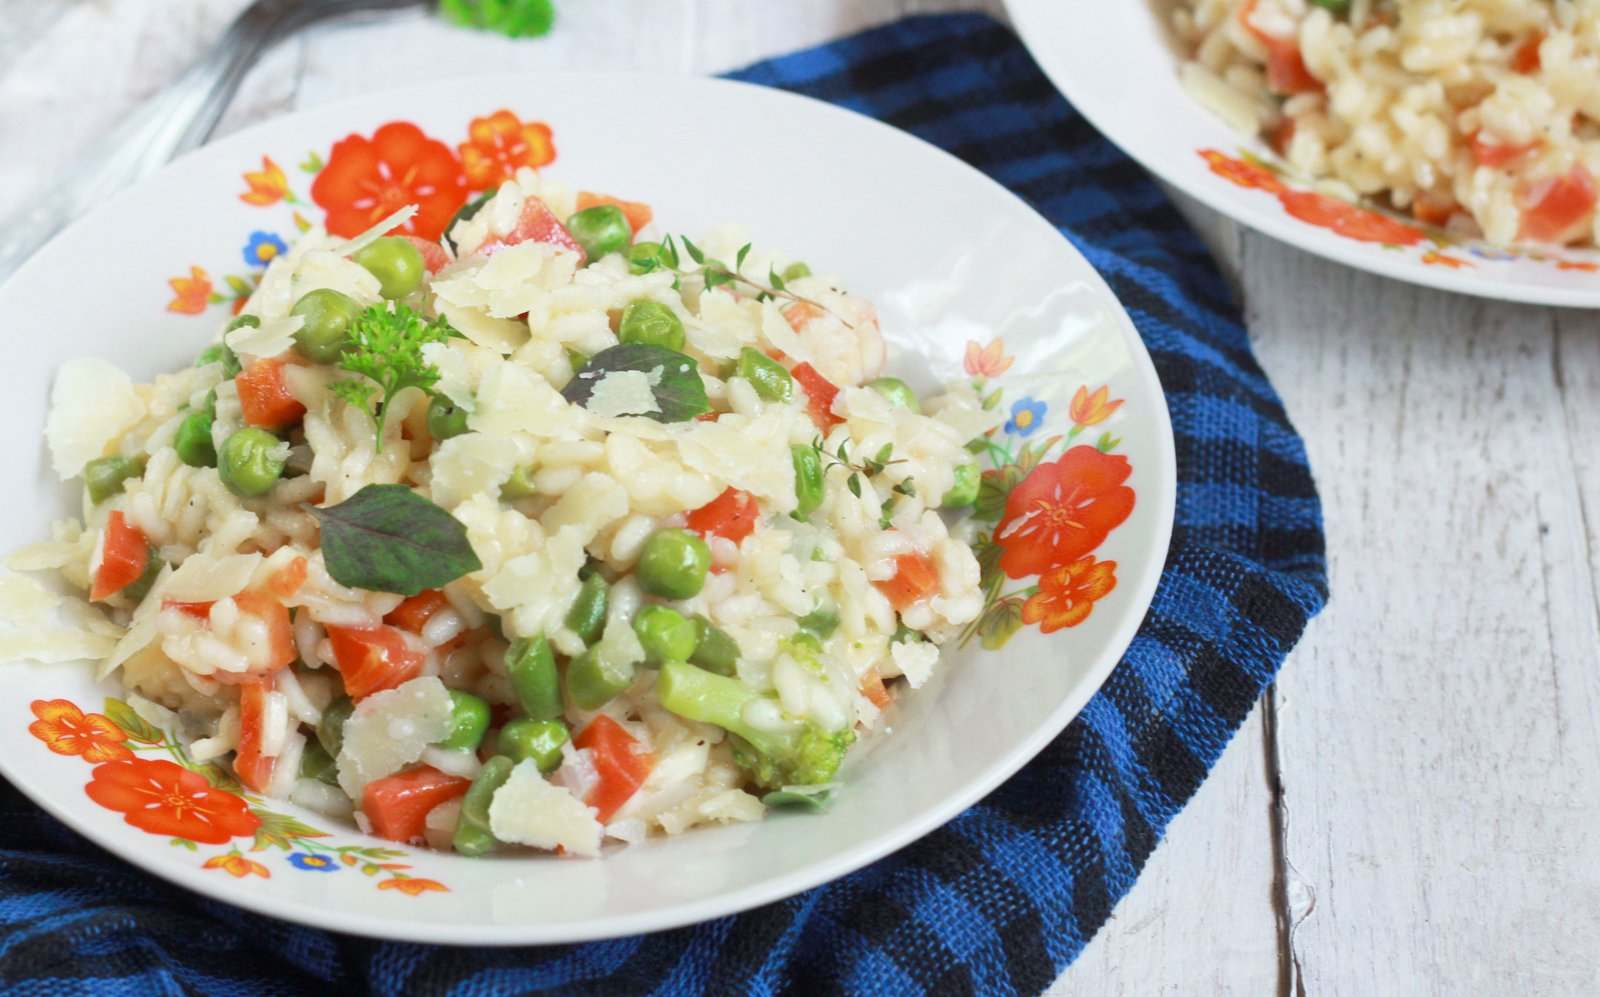 Mix Vegetable Risotto Recipe